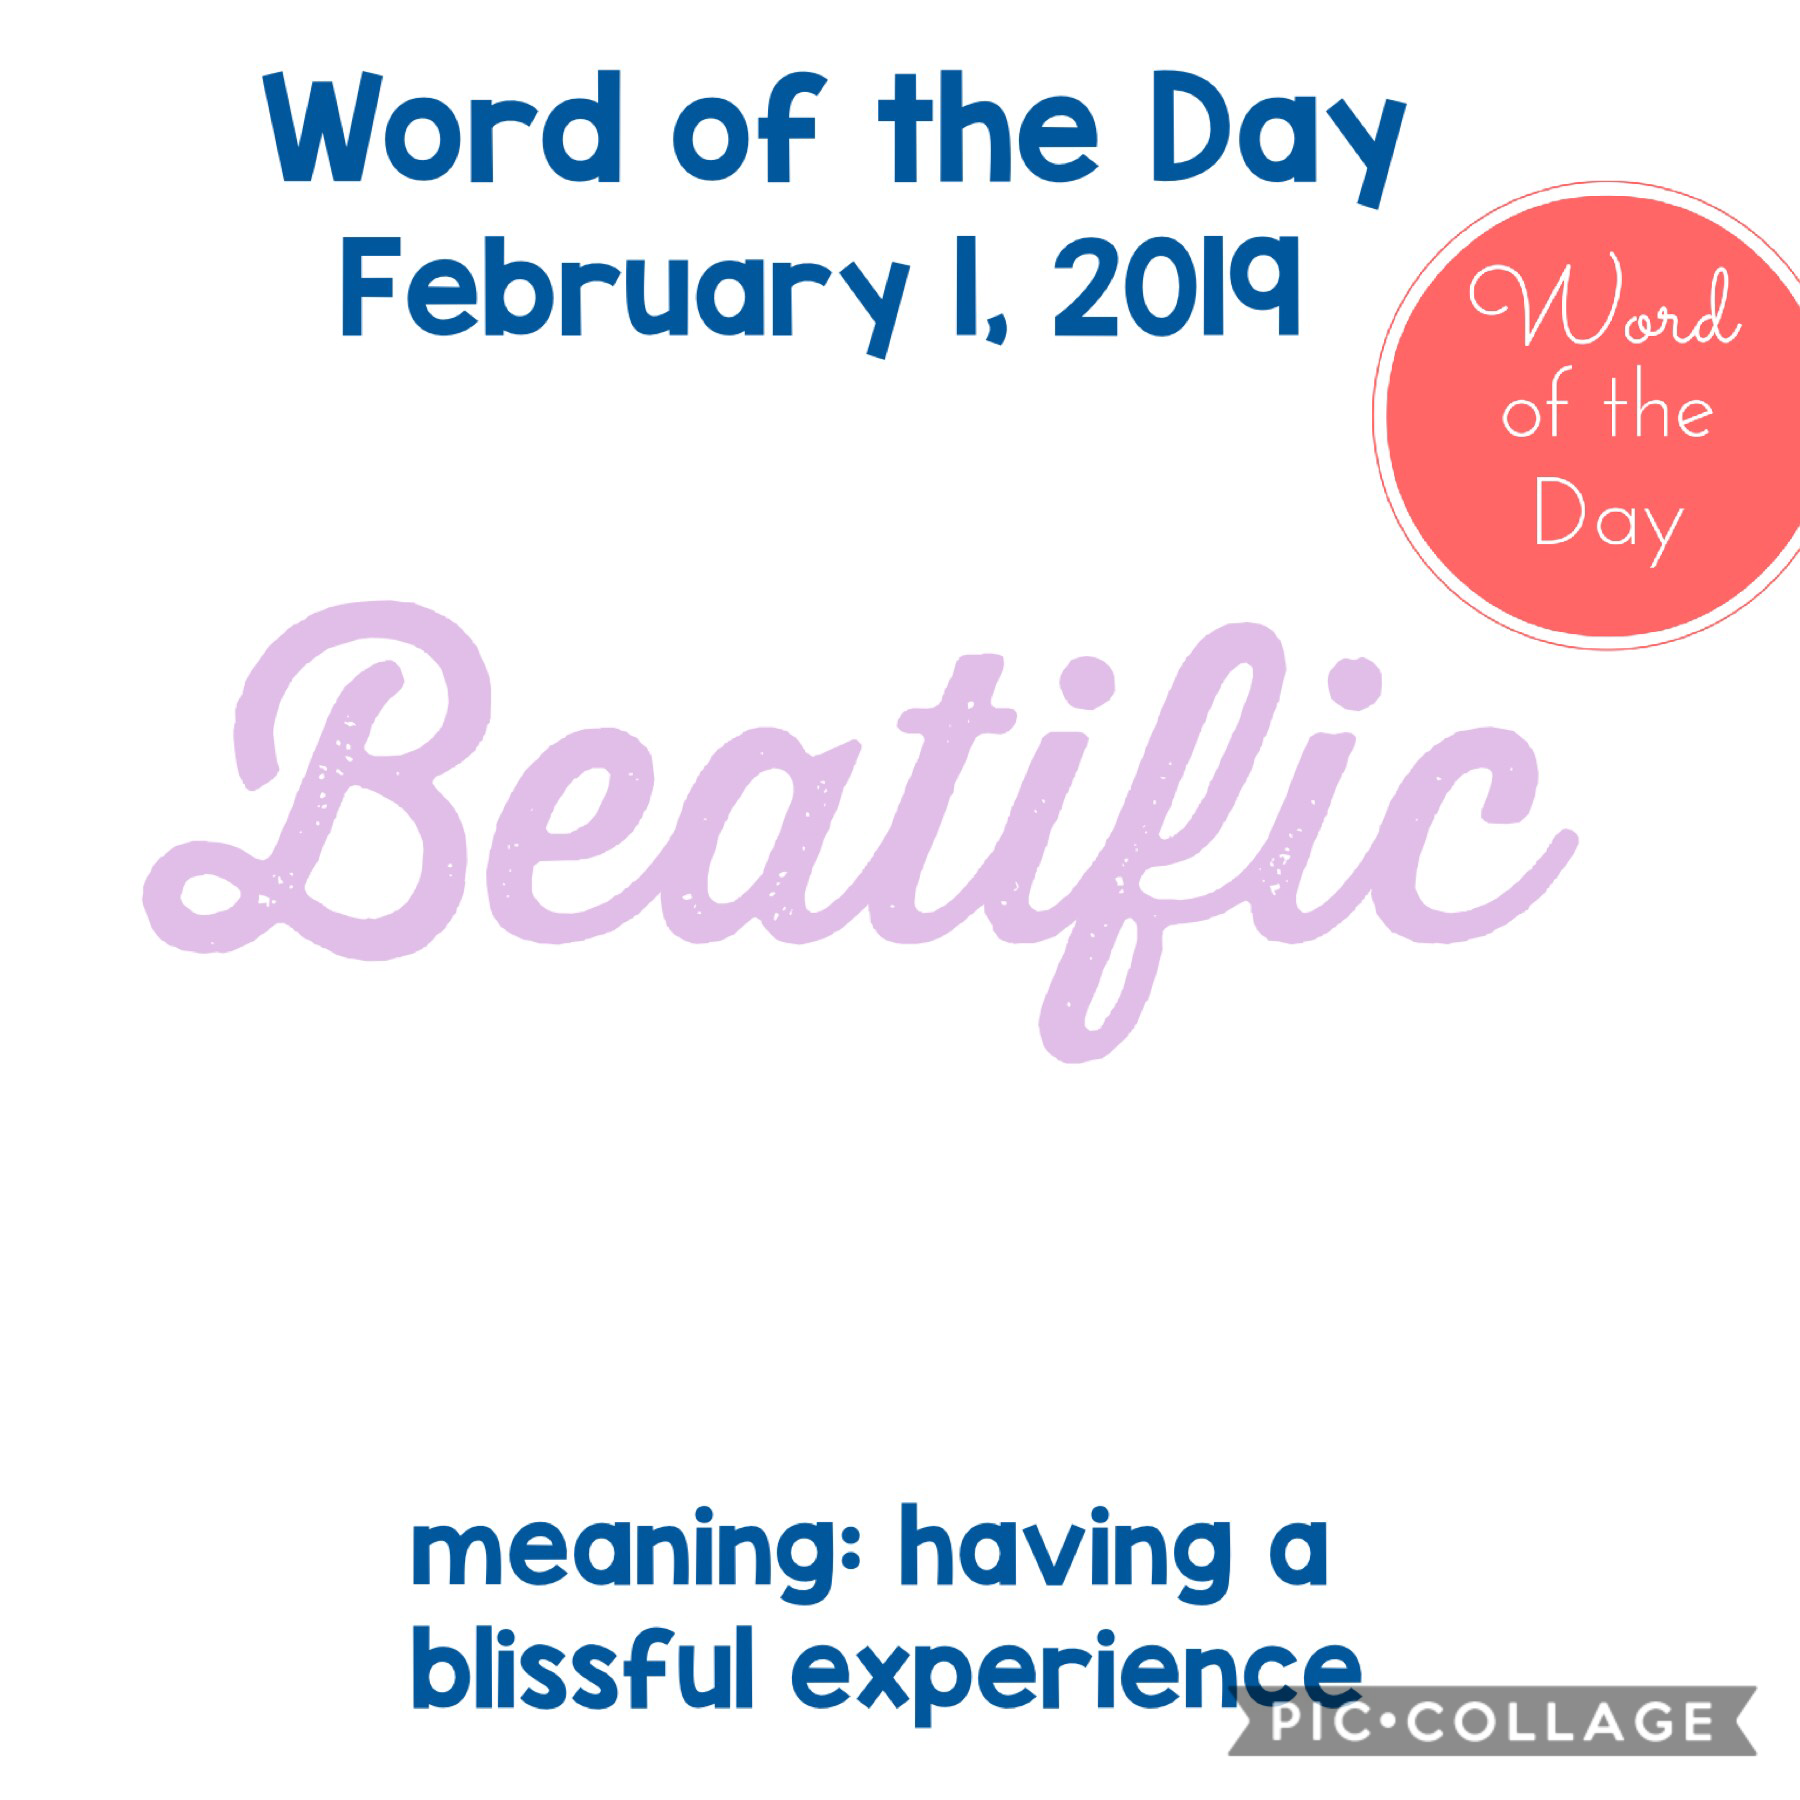 I’m gonna start doing a word of the week
(or at least try)
February 1, 2019